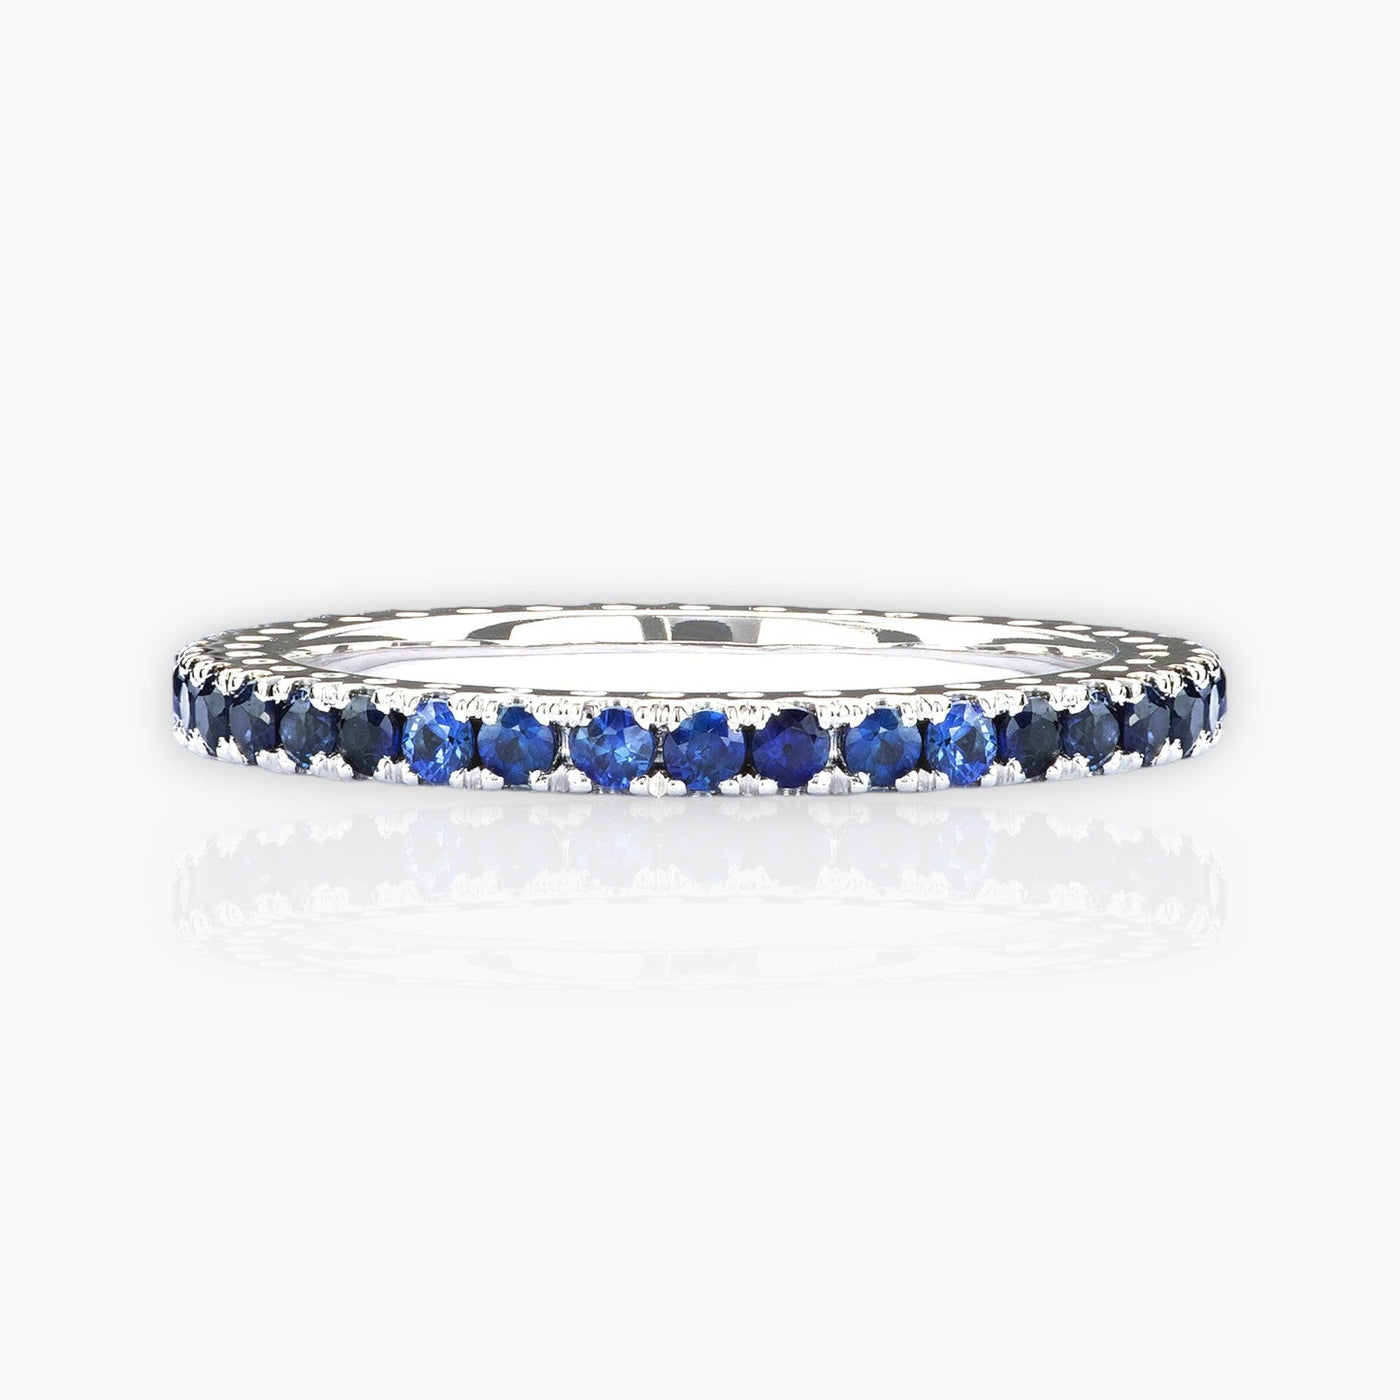 White Gold Eternity Ring with Blue Sapphires - Moregola Fine Jewelry